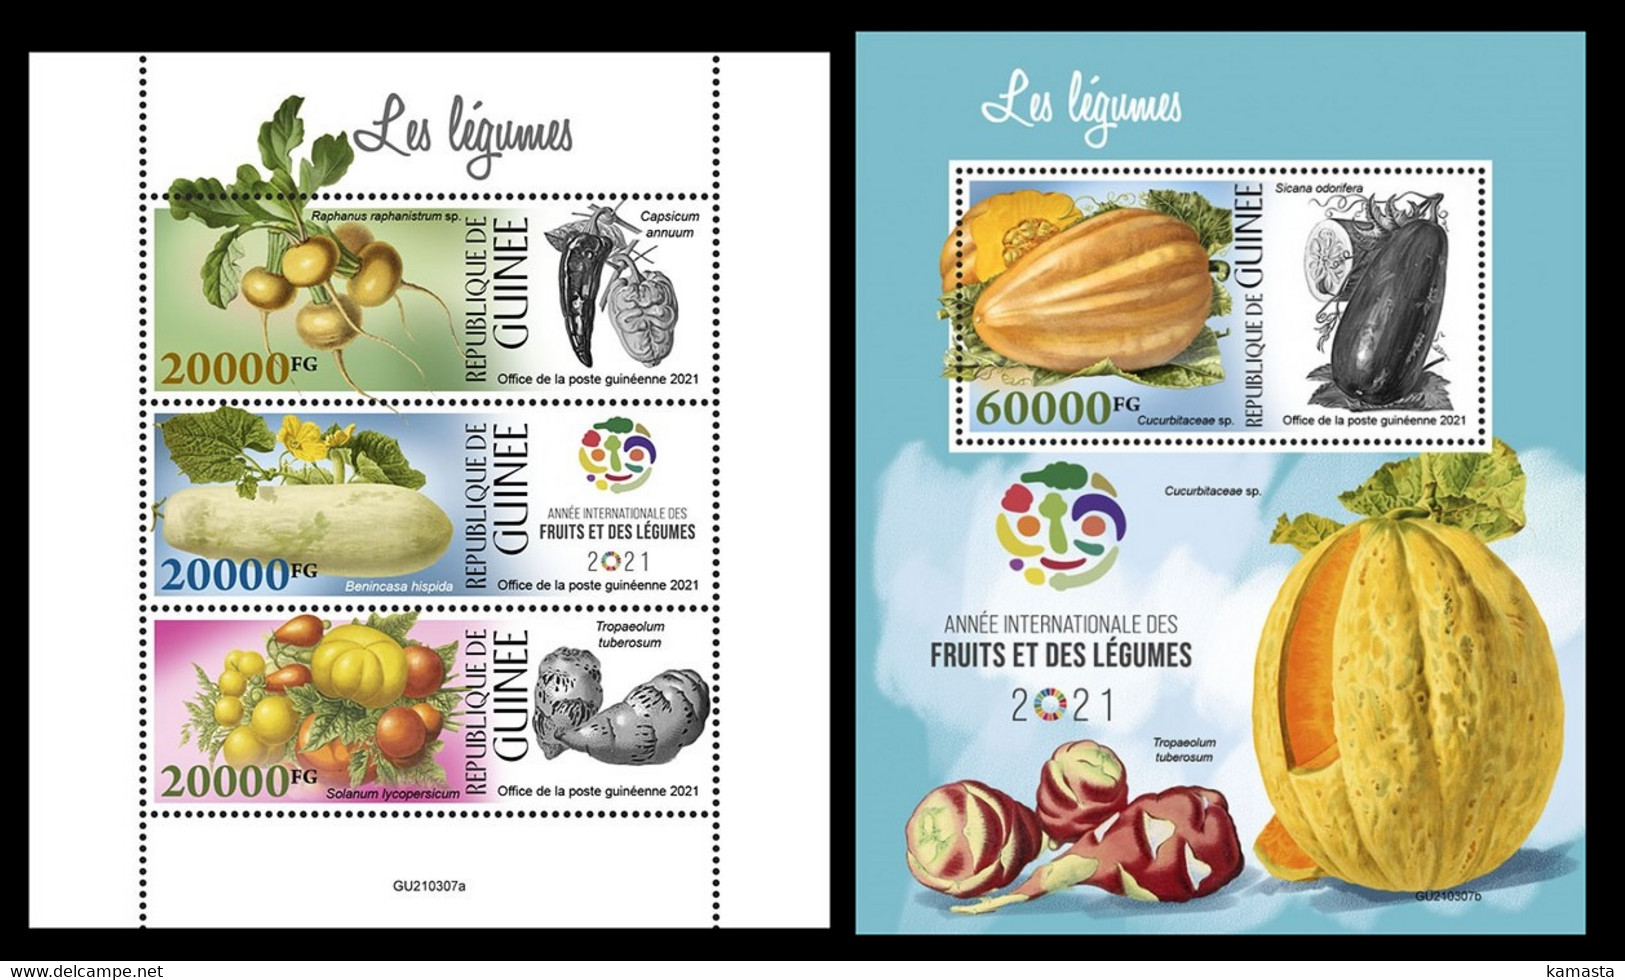 Guinea 2021 Vegetables. (307) OFFICIAL ISSUE - Légumes